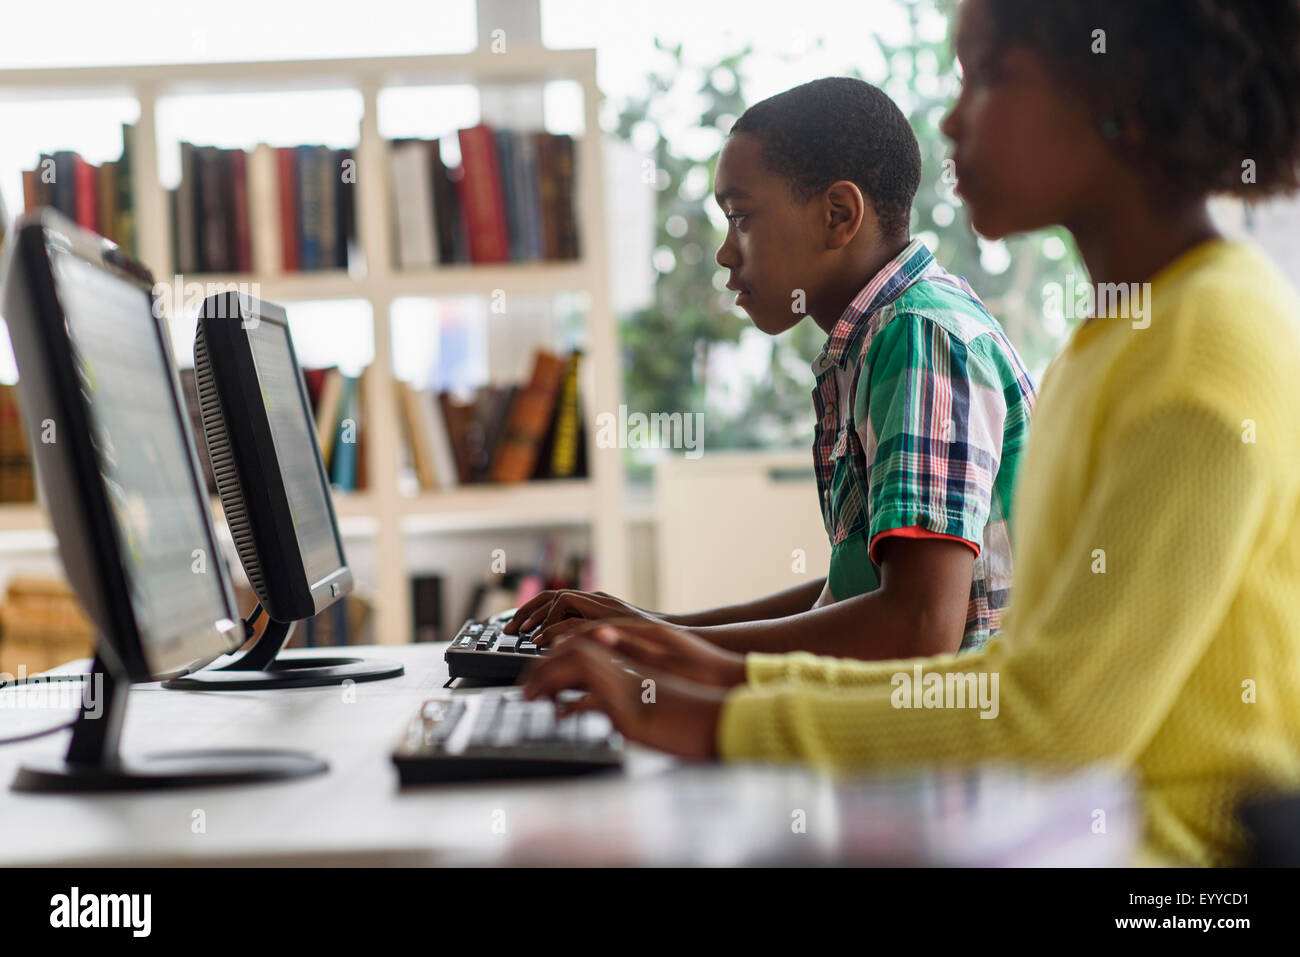 Black students using computers in classroom Stock Photo